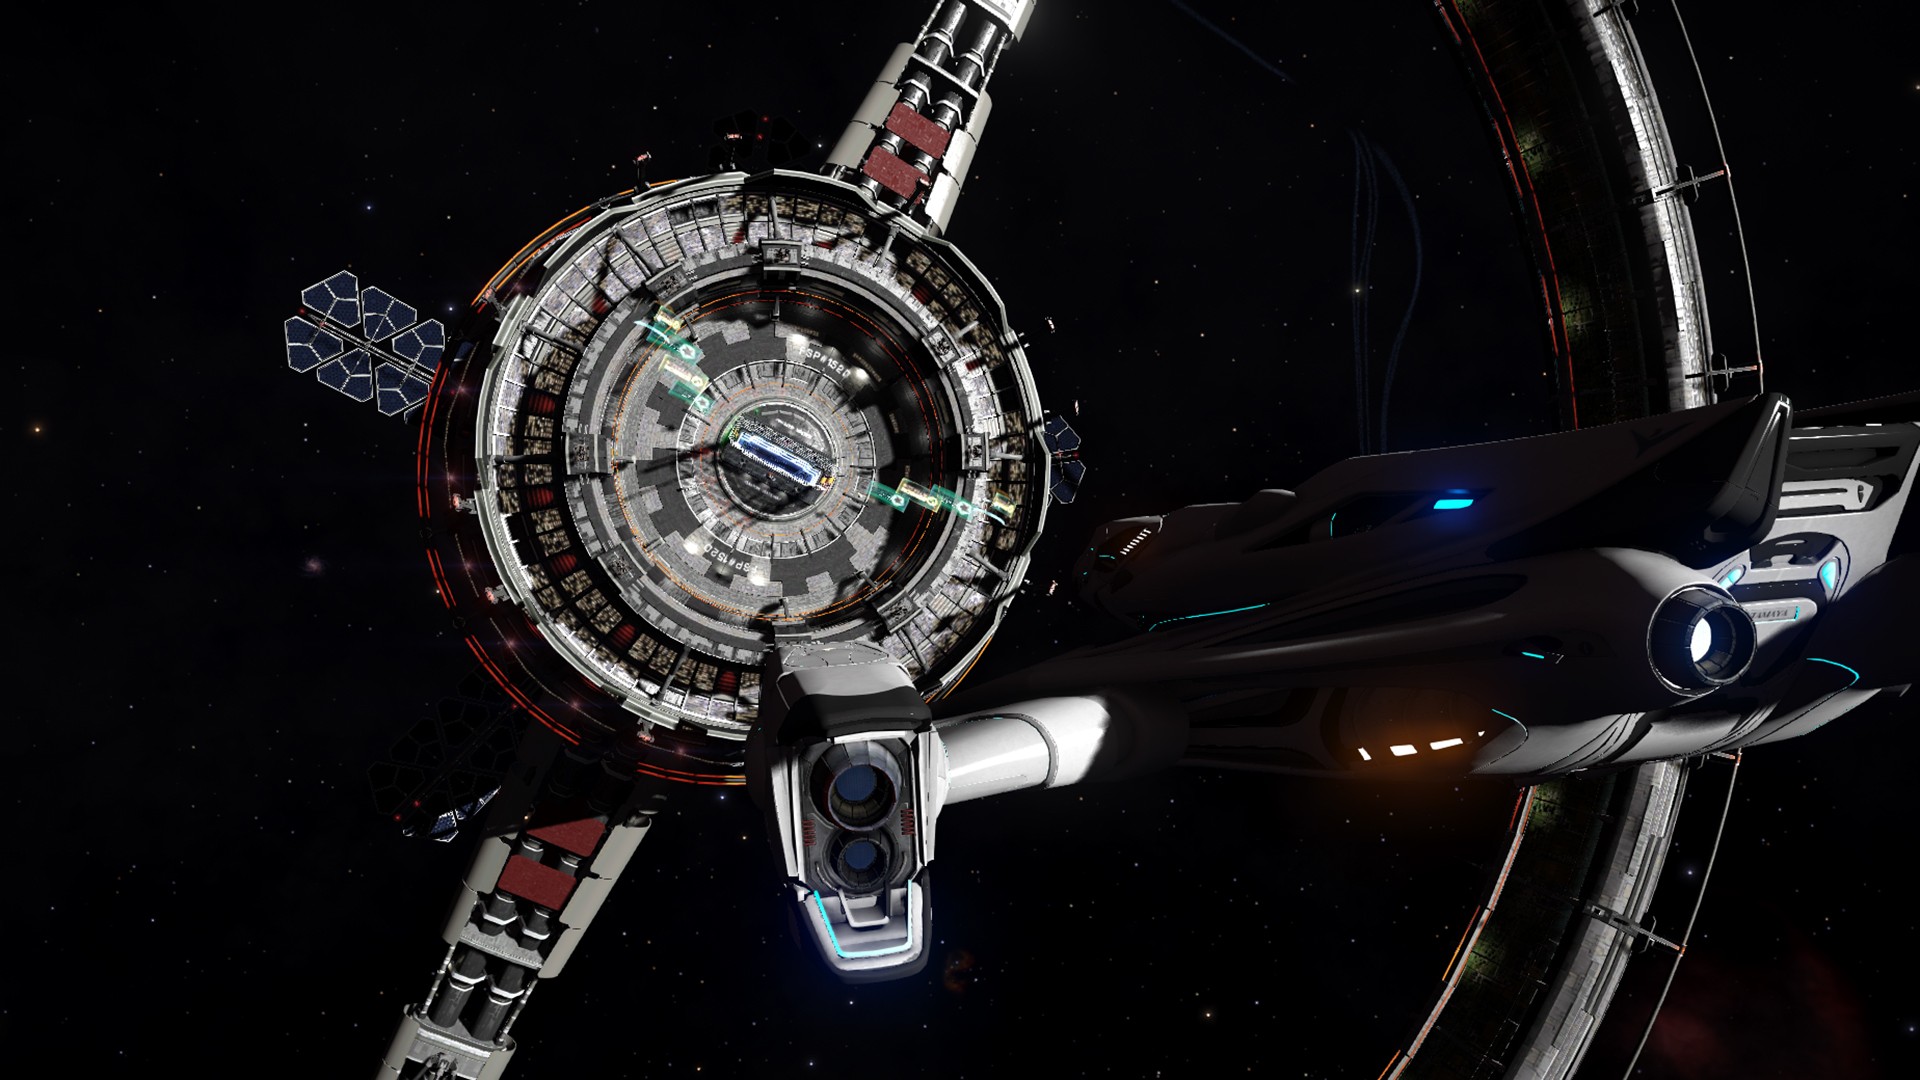 General 1920x1080 Elite: Dangerous space science fiction video games PC gaming space station screen shot